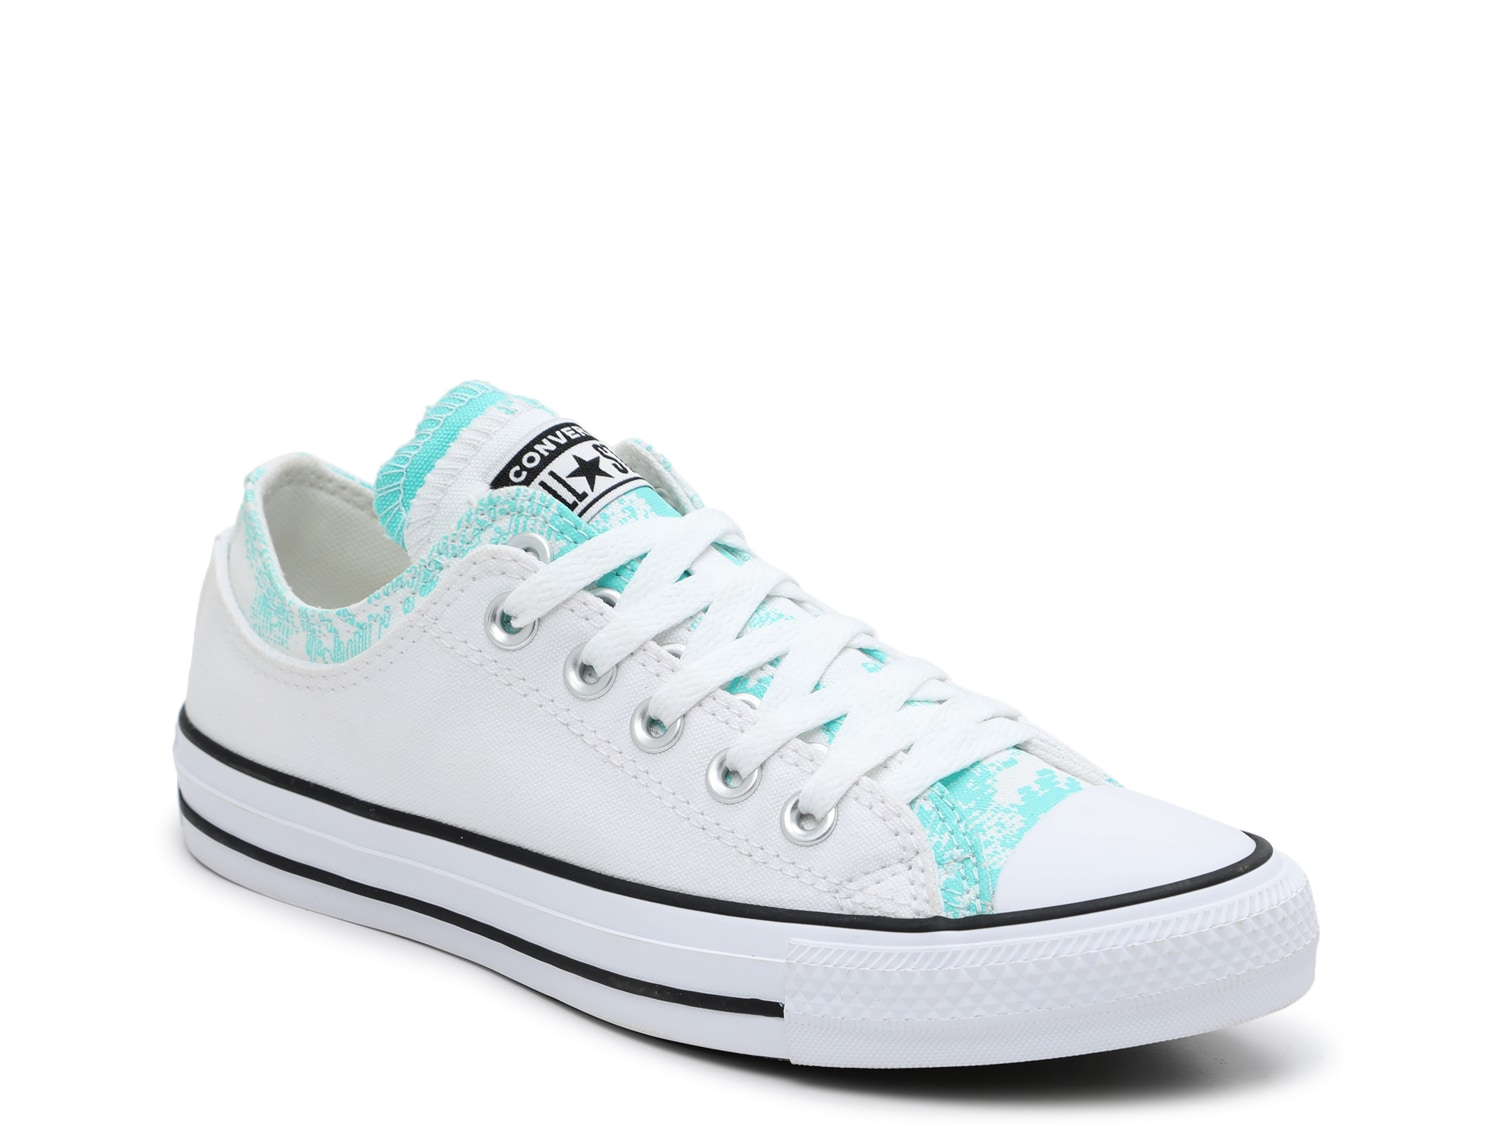 Converse Chuck Taylor All Star Double Tongue Sneaker - Women's - Free Shipping |